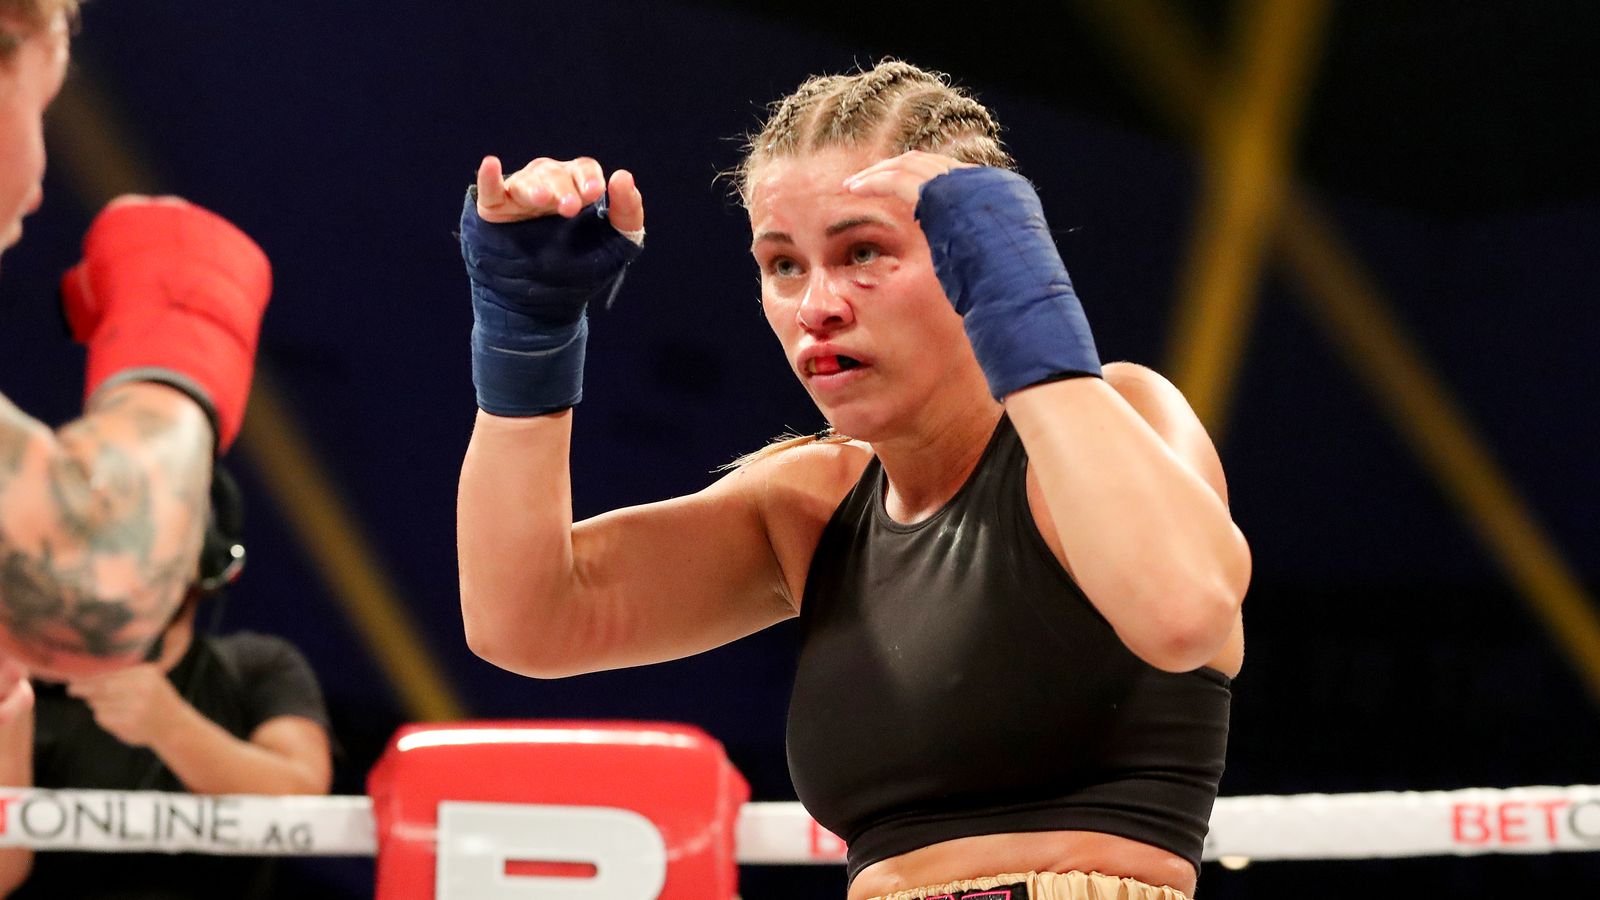 Paige VanZant bareknuckle boxing career is off to a slow start at 0-2, than...